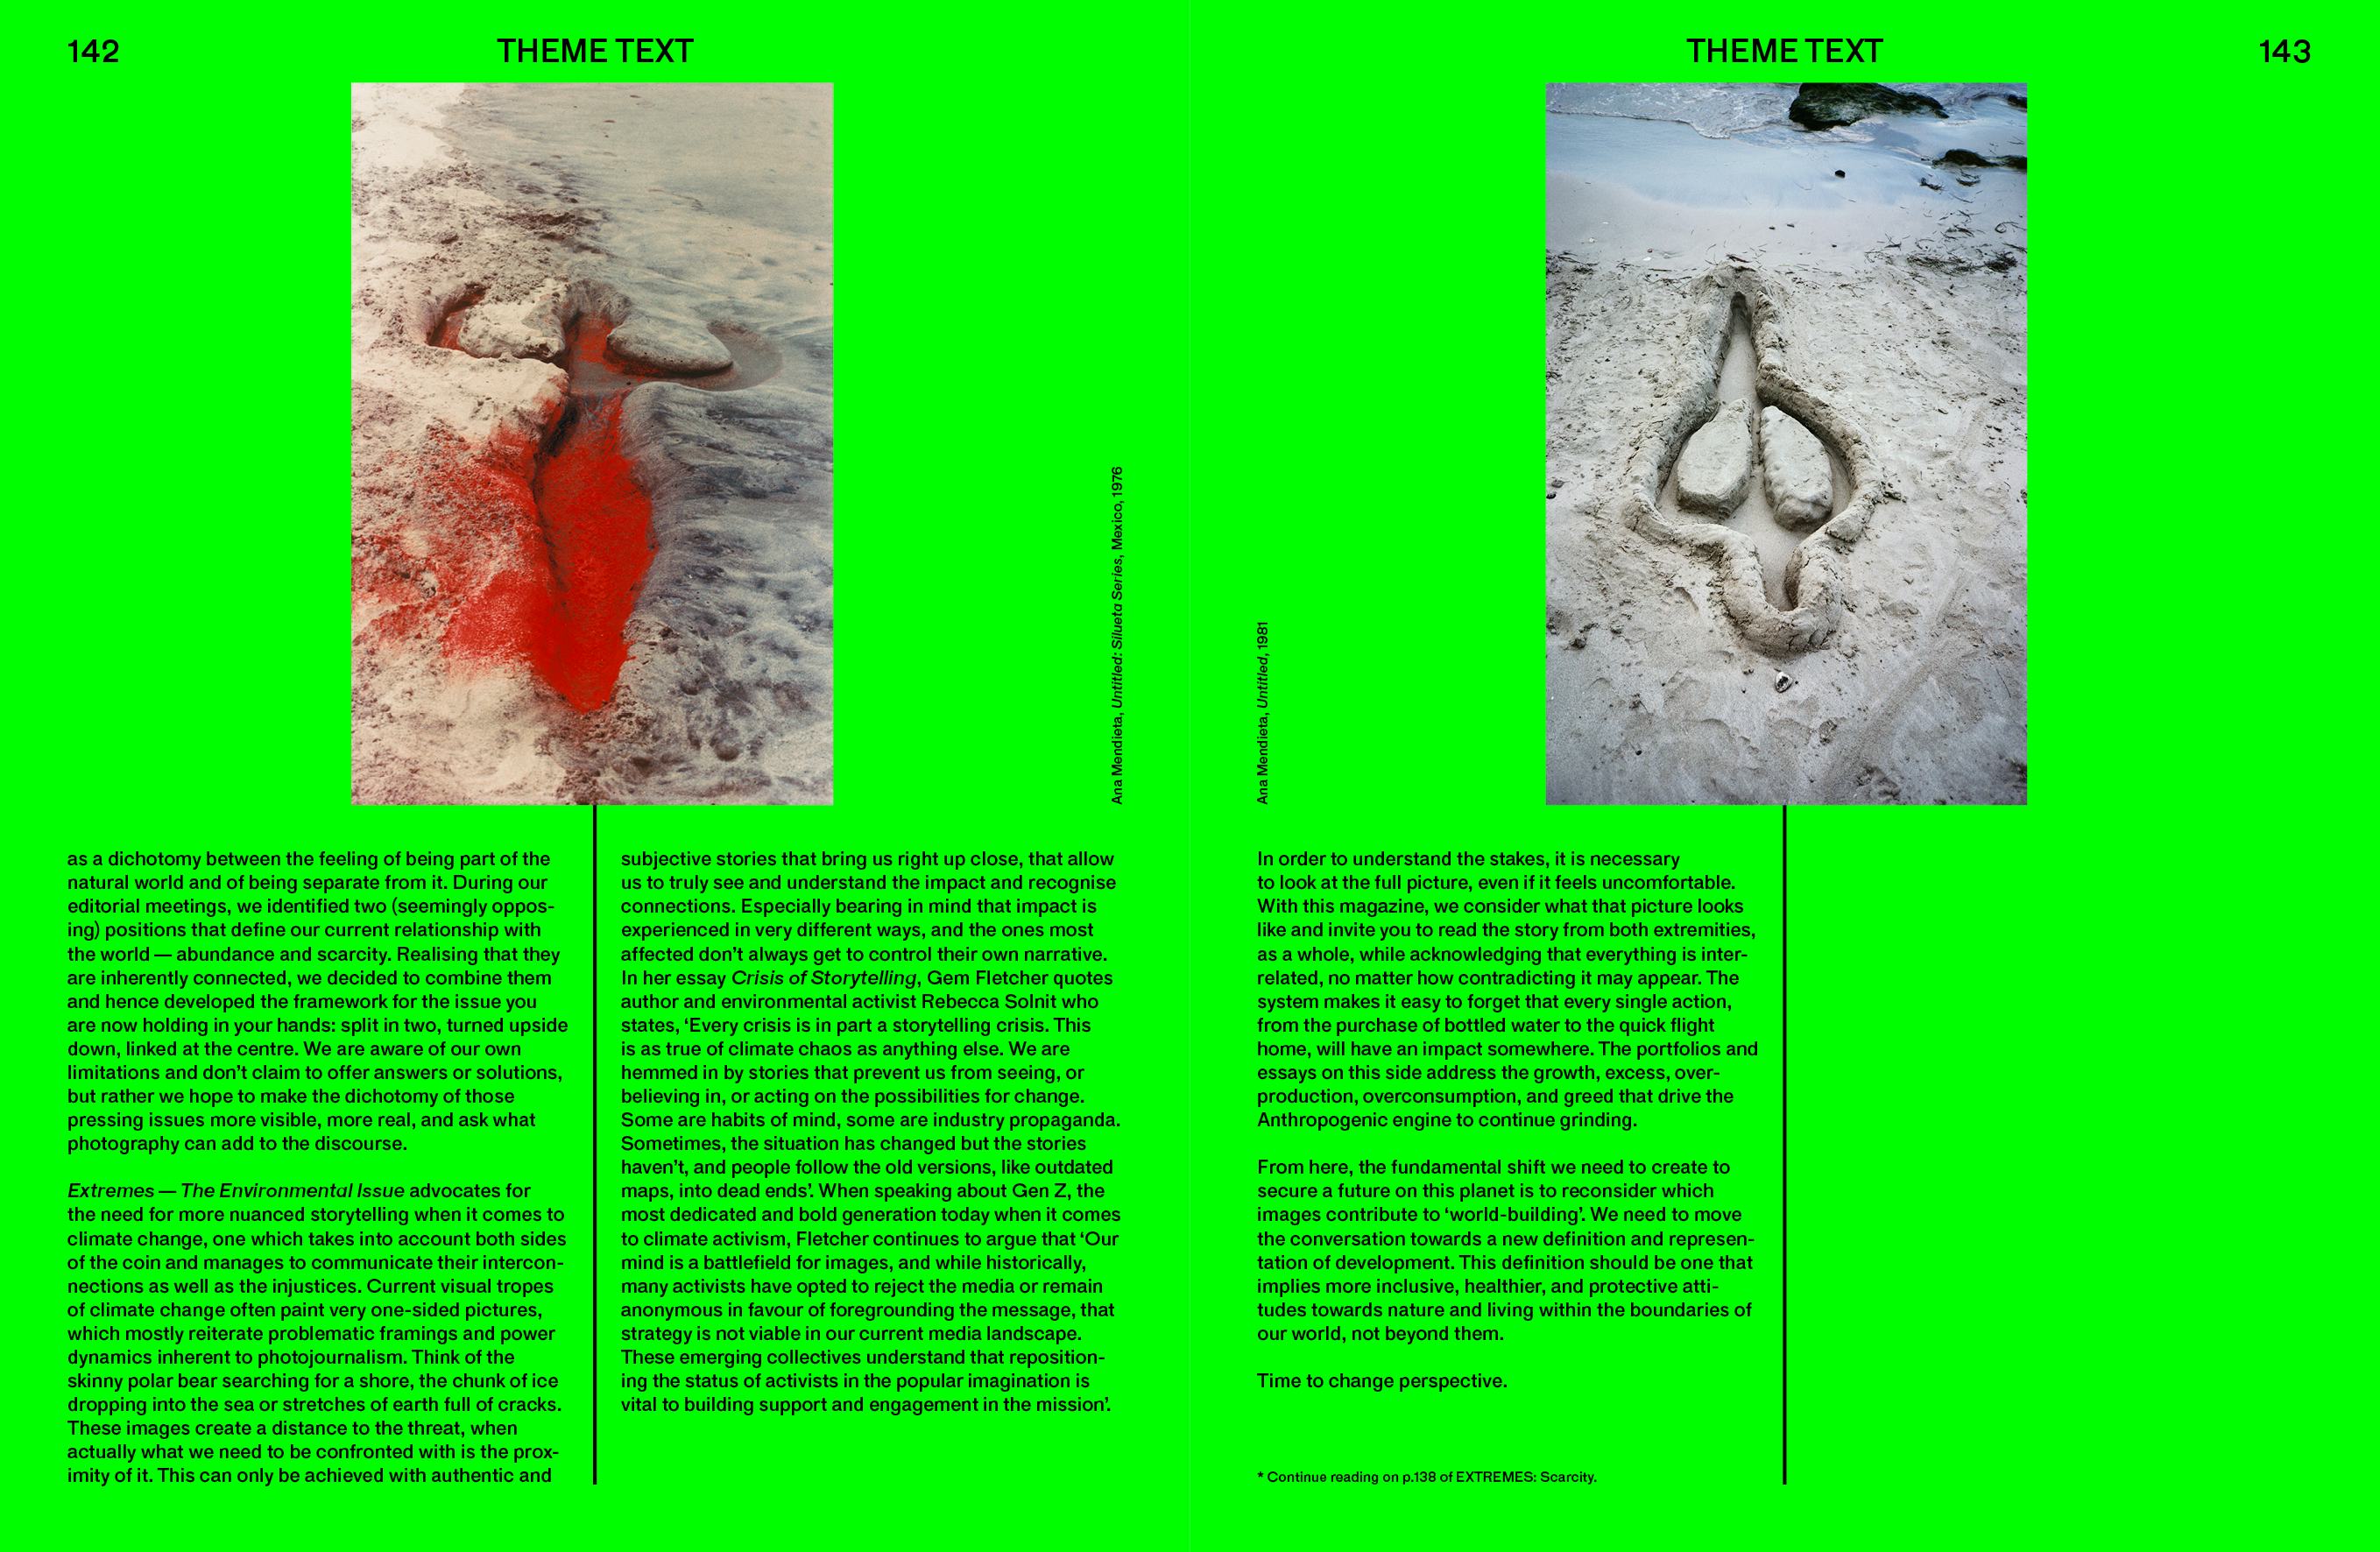 Spread of Foam Magazine #64: EXTREMES – The Environmental Issue, showing images by Ana Mendieta of figures drawn in the sand